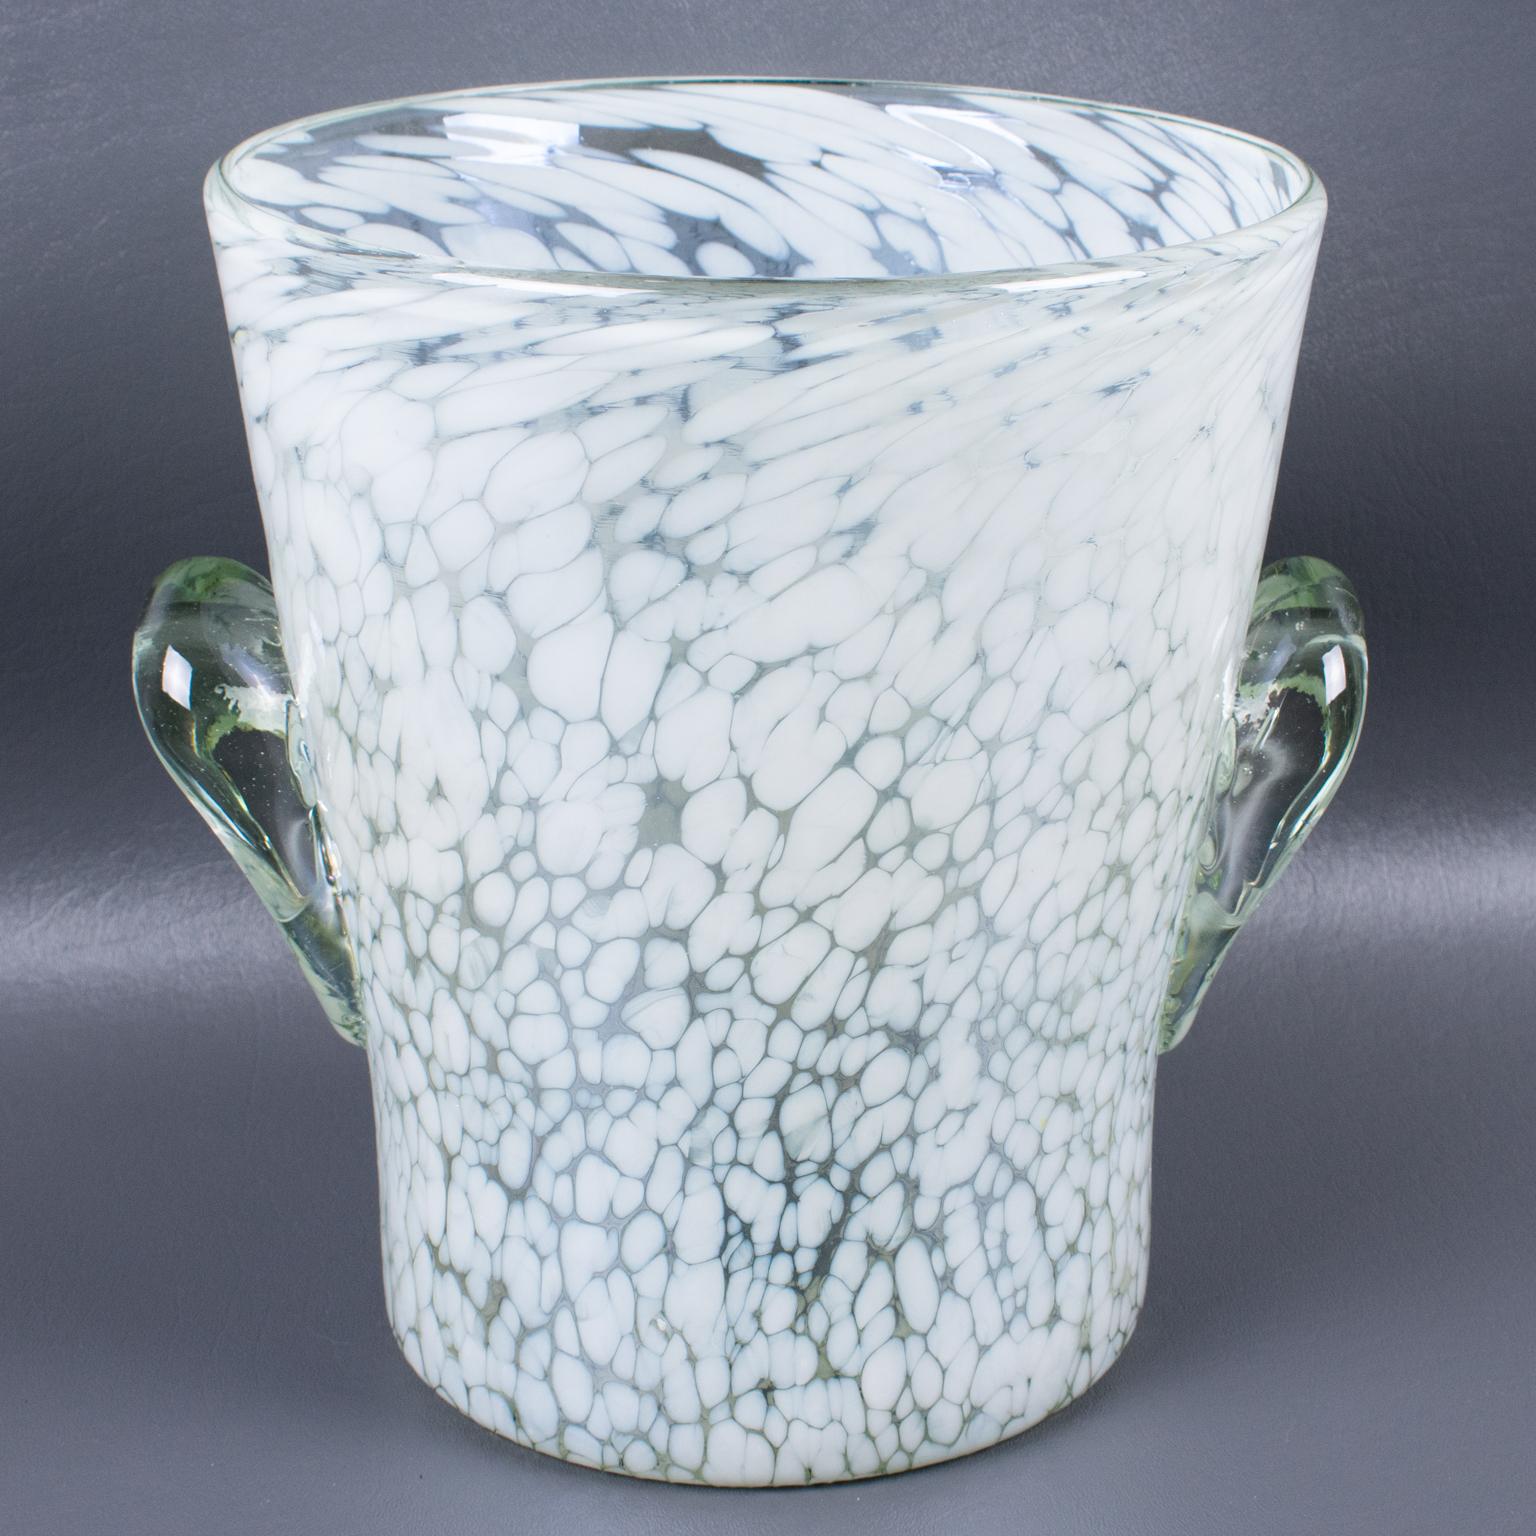 1960s Italian glass champagne cooler or wine cooler or ice bucket. Mouth-blown in Empoli, Italy. Lovely white bubbles flowing pattern with clear handles on sides. Polished pontil mark on the bottom. No visible maker's mark.
Measurements: 9.44 in.